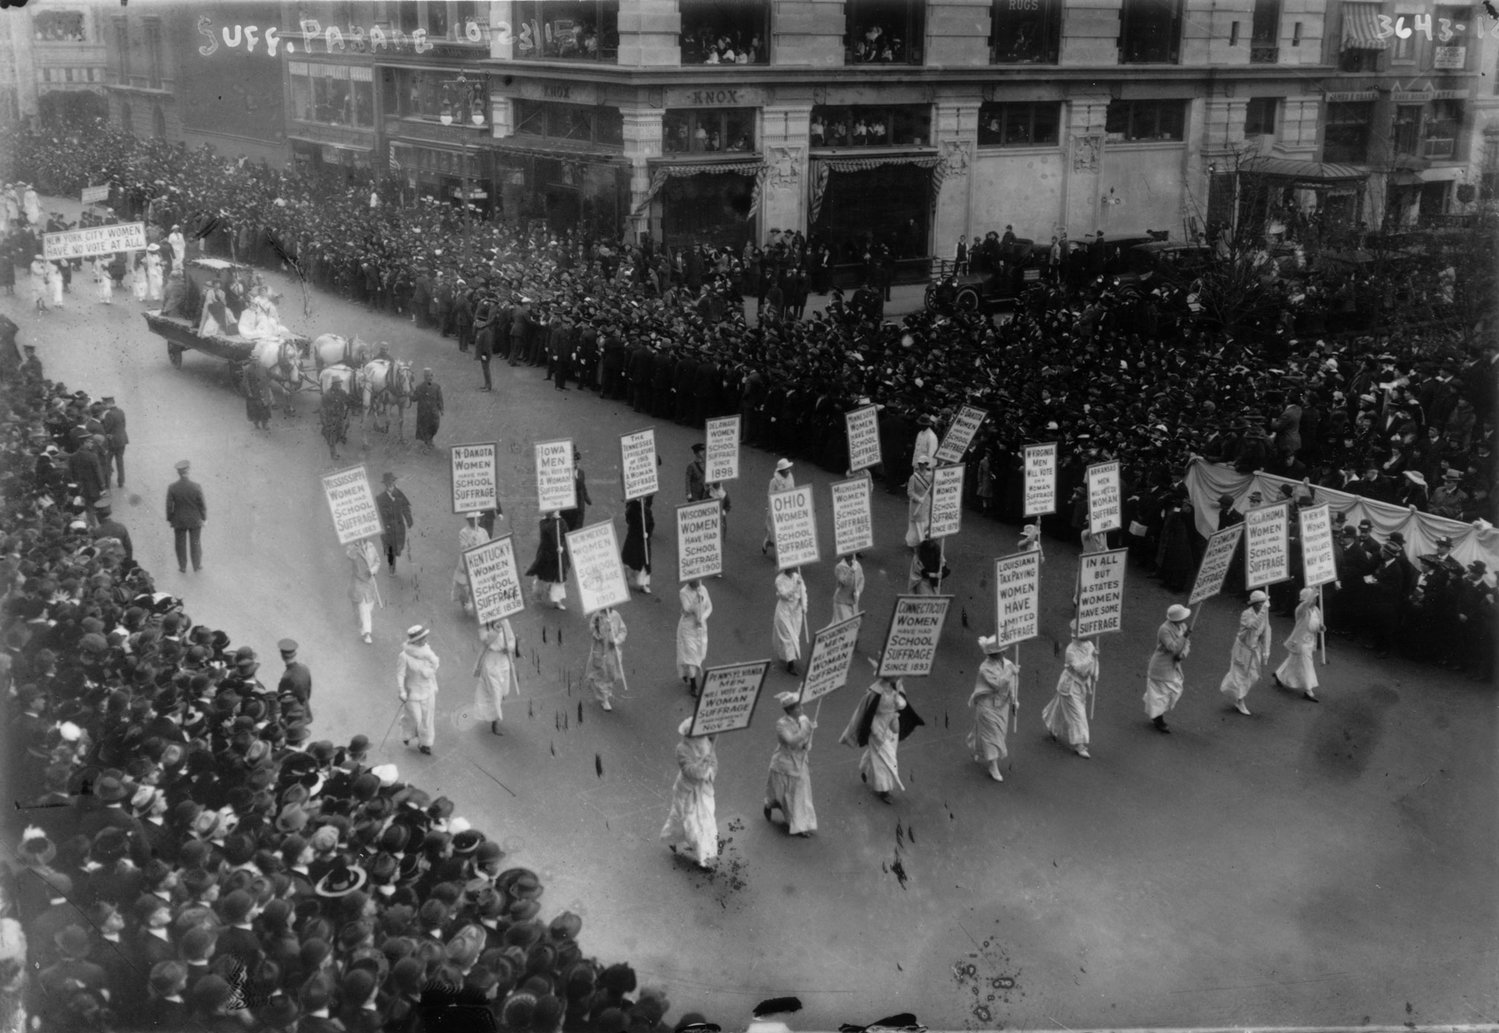 A suffrage parade Oct. 23, 1915, probably in New York City.